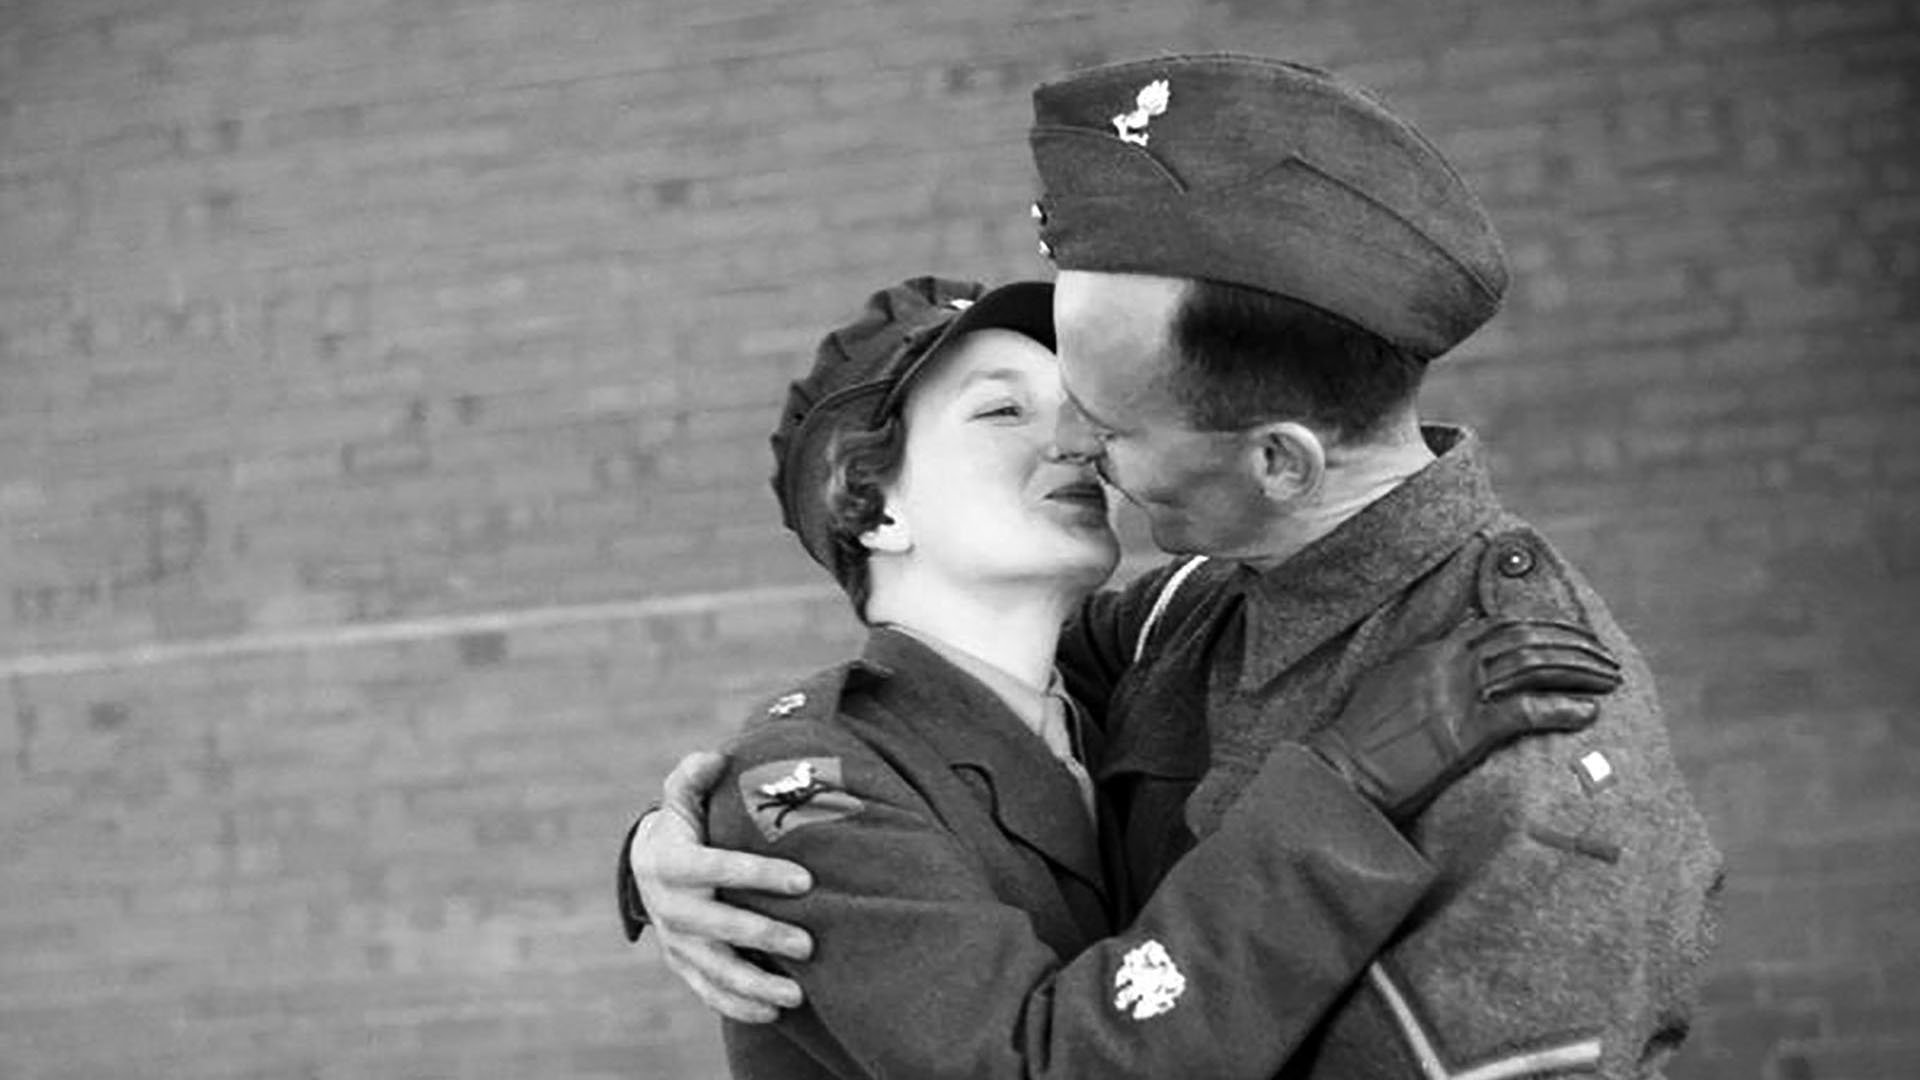 Staff Sergeant Mabel Kathleen Twist, thought to be the only person of her rank in Northern Ireland was commended by Auxiliary Territorial Service Chief Controller Jean Knox as the 'smartest woman in the A.T.S.'. She is embraced by her husband Lance Bombardier Twist, on leave from England.